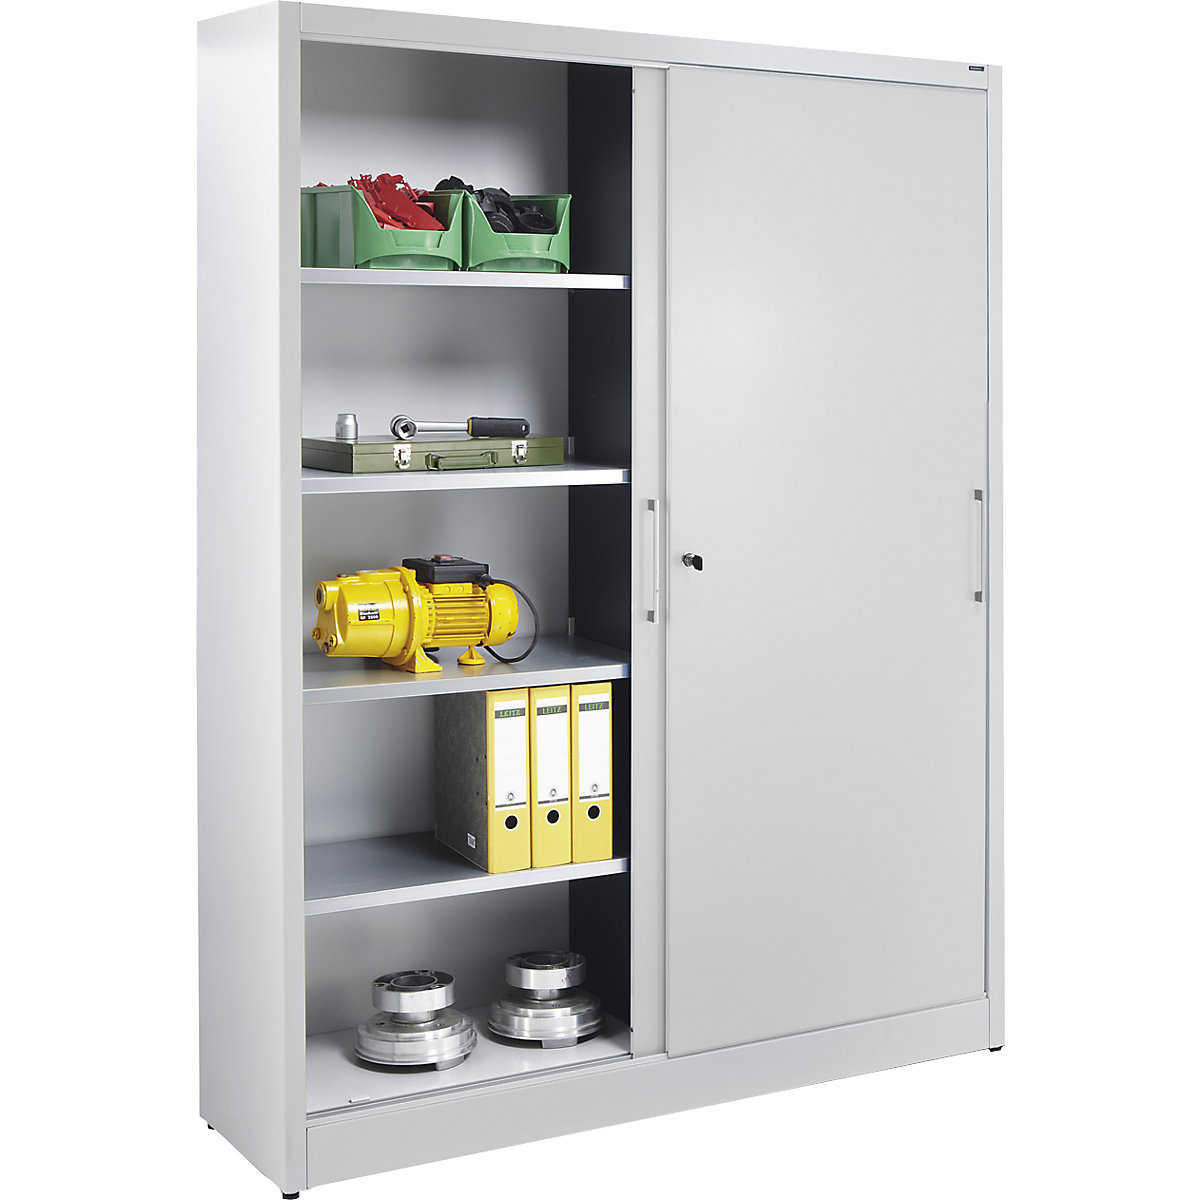 Sliding door cupboard, height 1950 mm – eurokraft pro, with centre partition and 2 x 4 shelves, width 1500 mm, depth 500 mm, doors in light grey RAL 7035-5